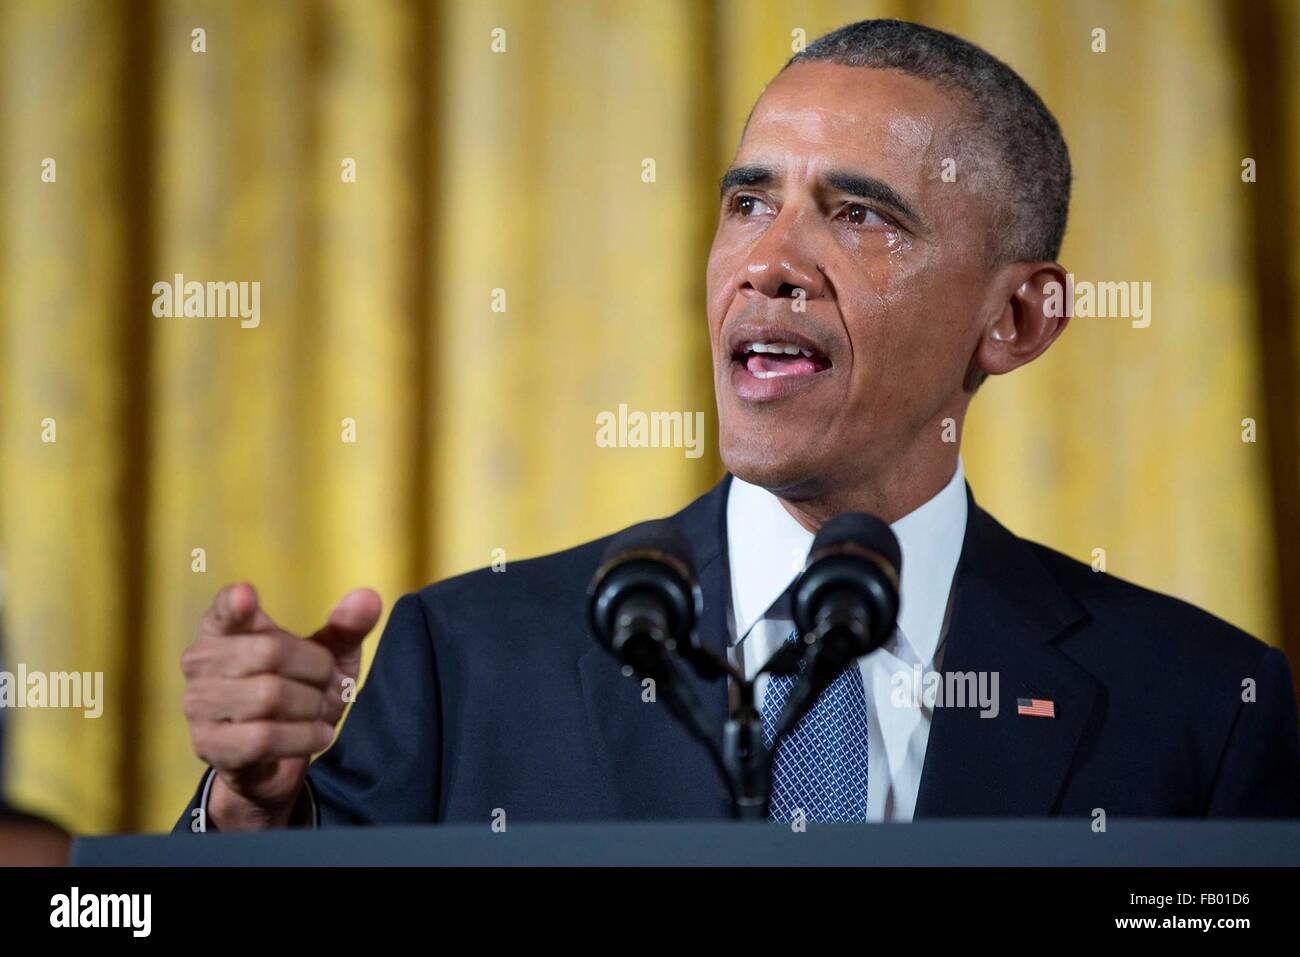 U.S President Barack Obama discuss gun violence as a tear rolls down his cheek during an emotional announcement on gun control in the East Room of the White House January 5, 2016 in Washington, DC. Stock Photo